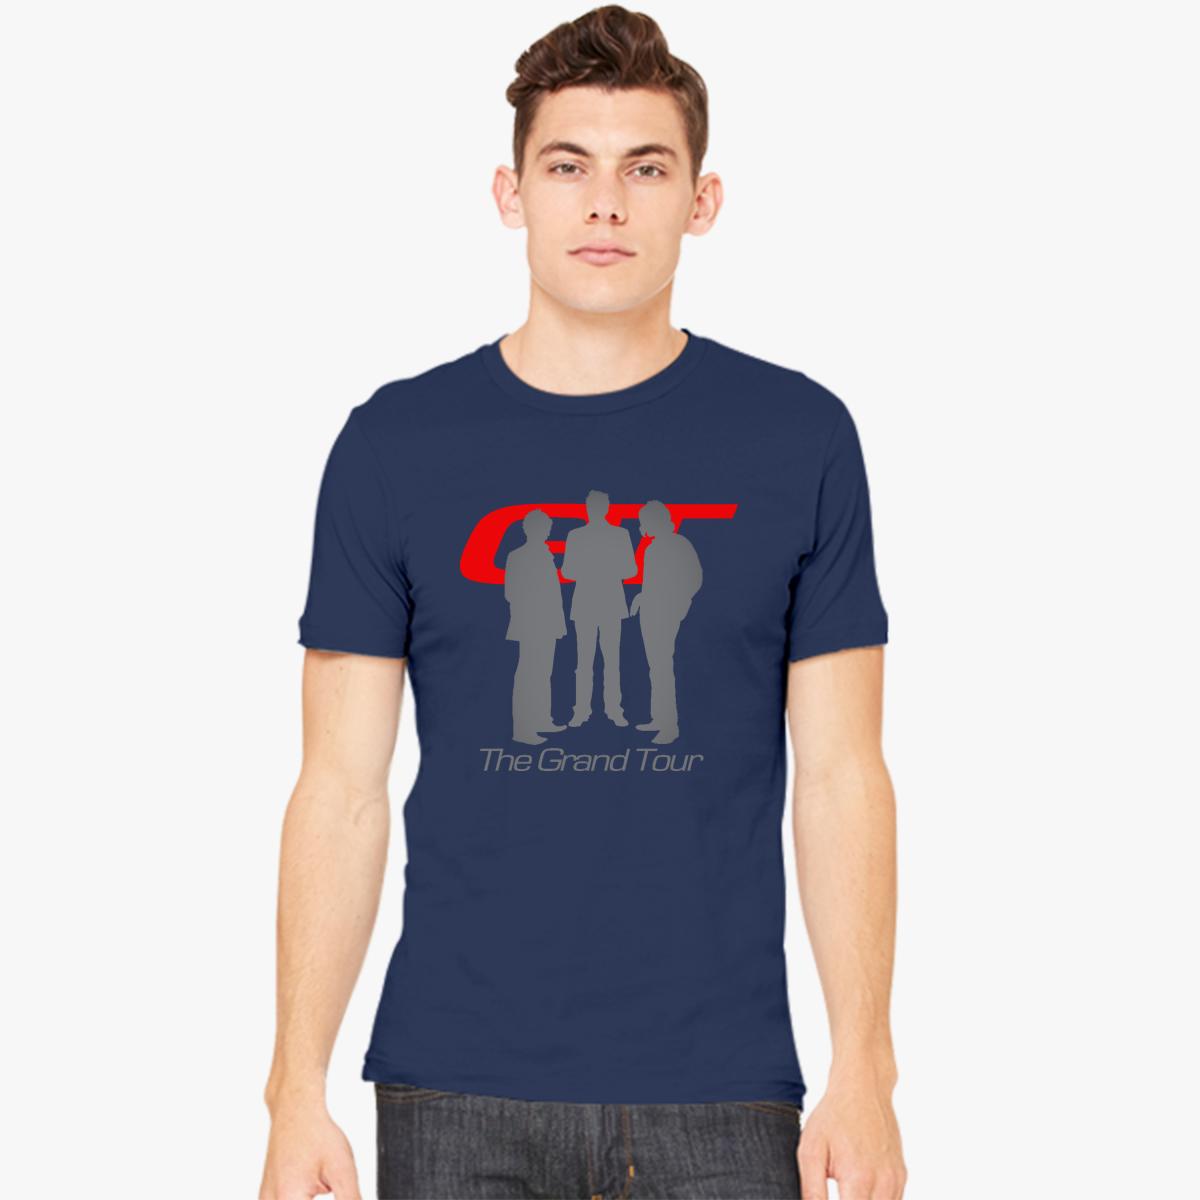 The Grand Tour - Clarkson Hammond and May Men's T-shirt